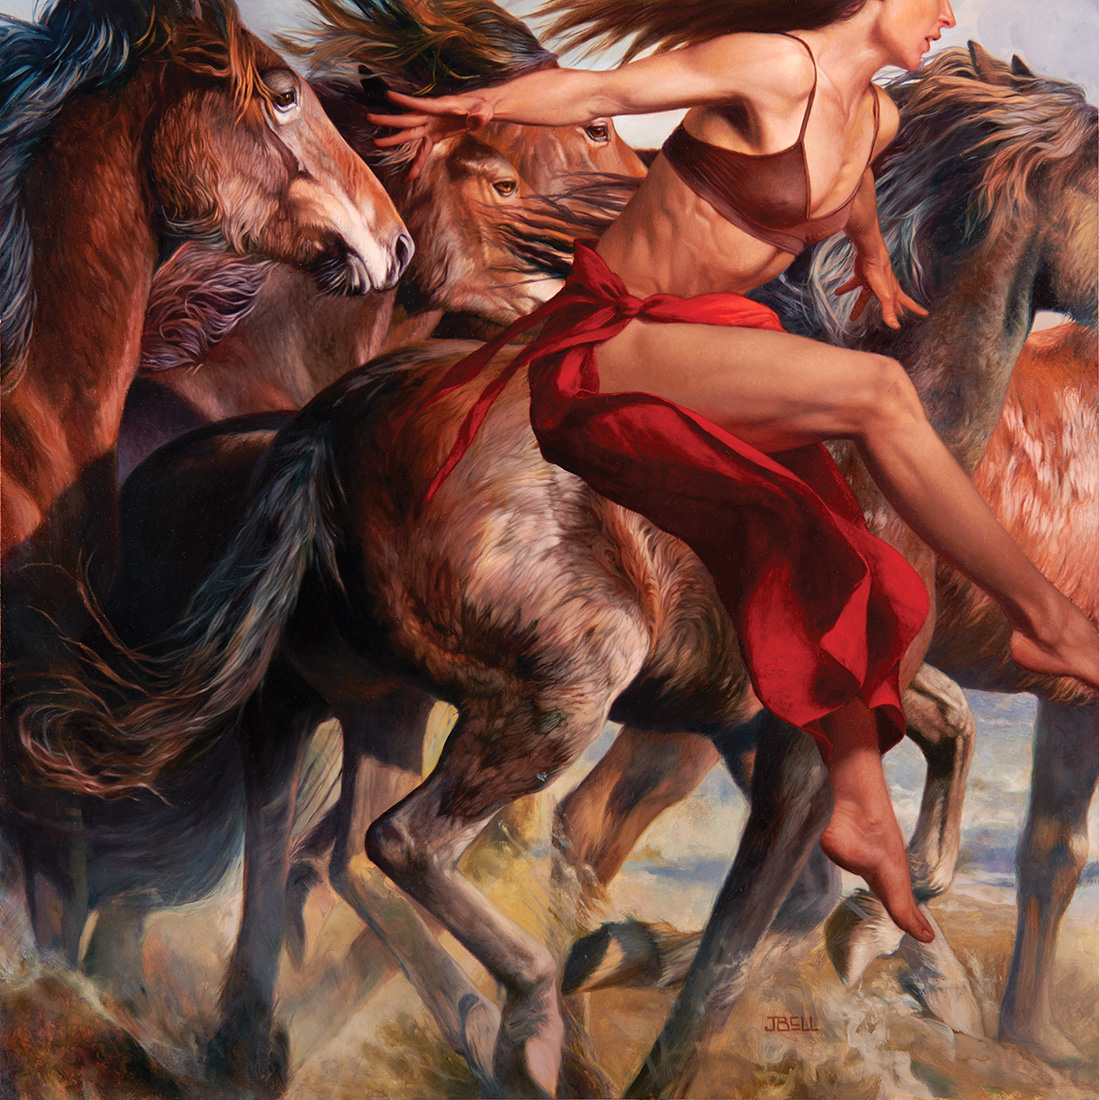 Several running horses with a woman in red riding one.